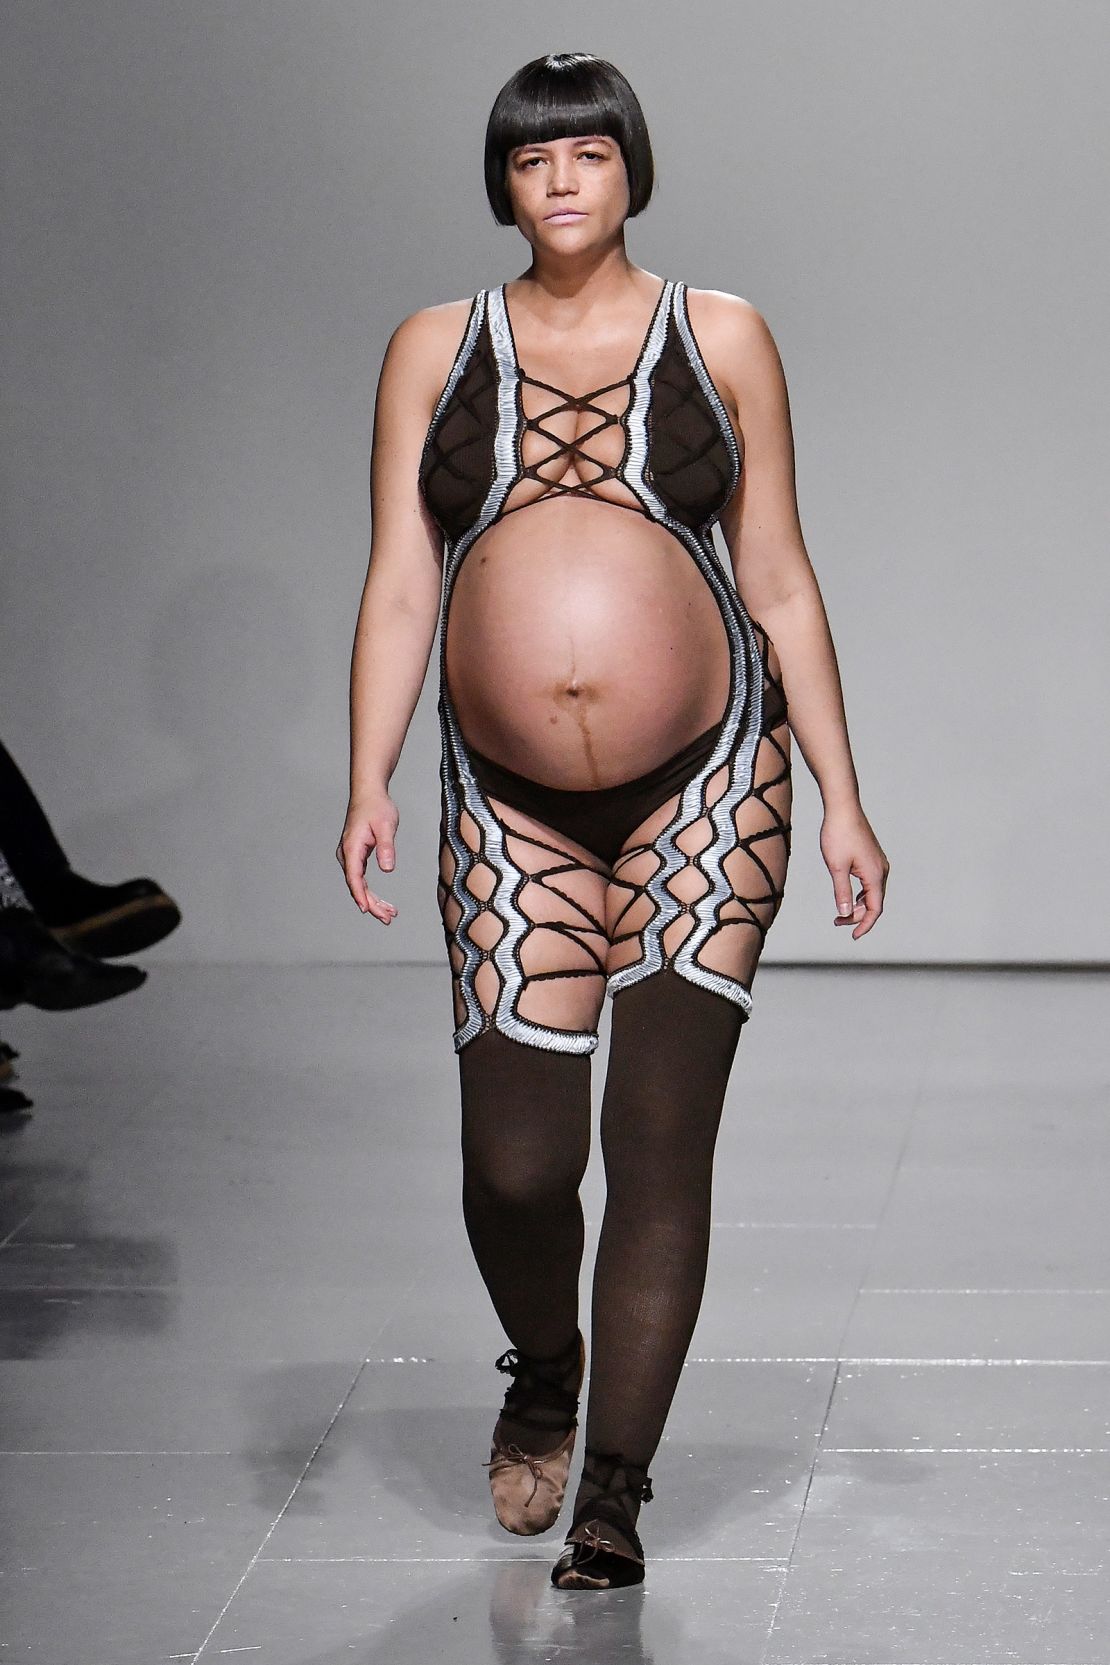 Pregnant artist and model Tessa Kuragi walks in the Sinead O'Dwyer show — one of the most diverse casting moments during London Fashion Week.